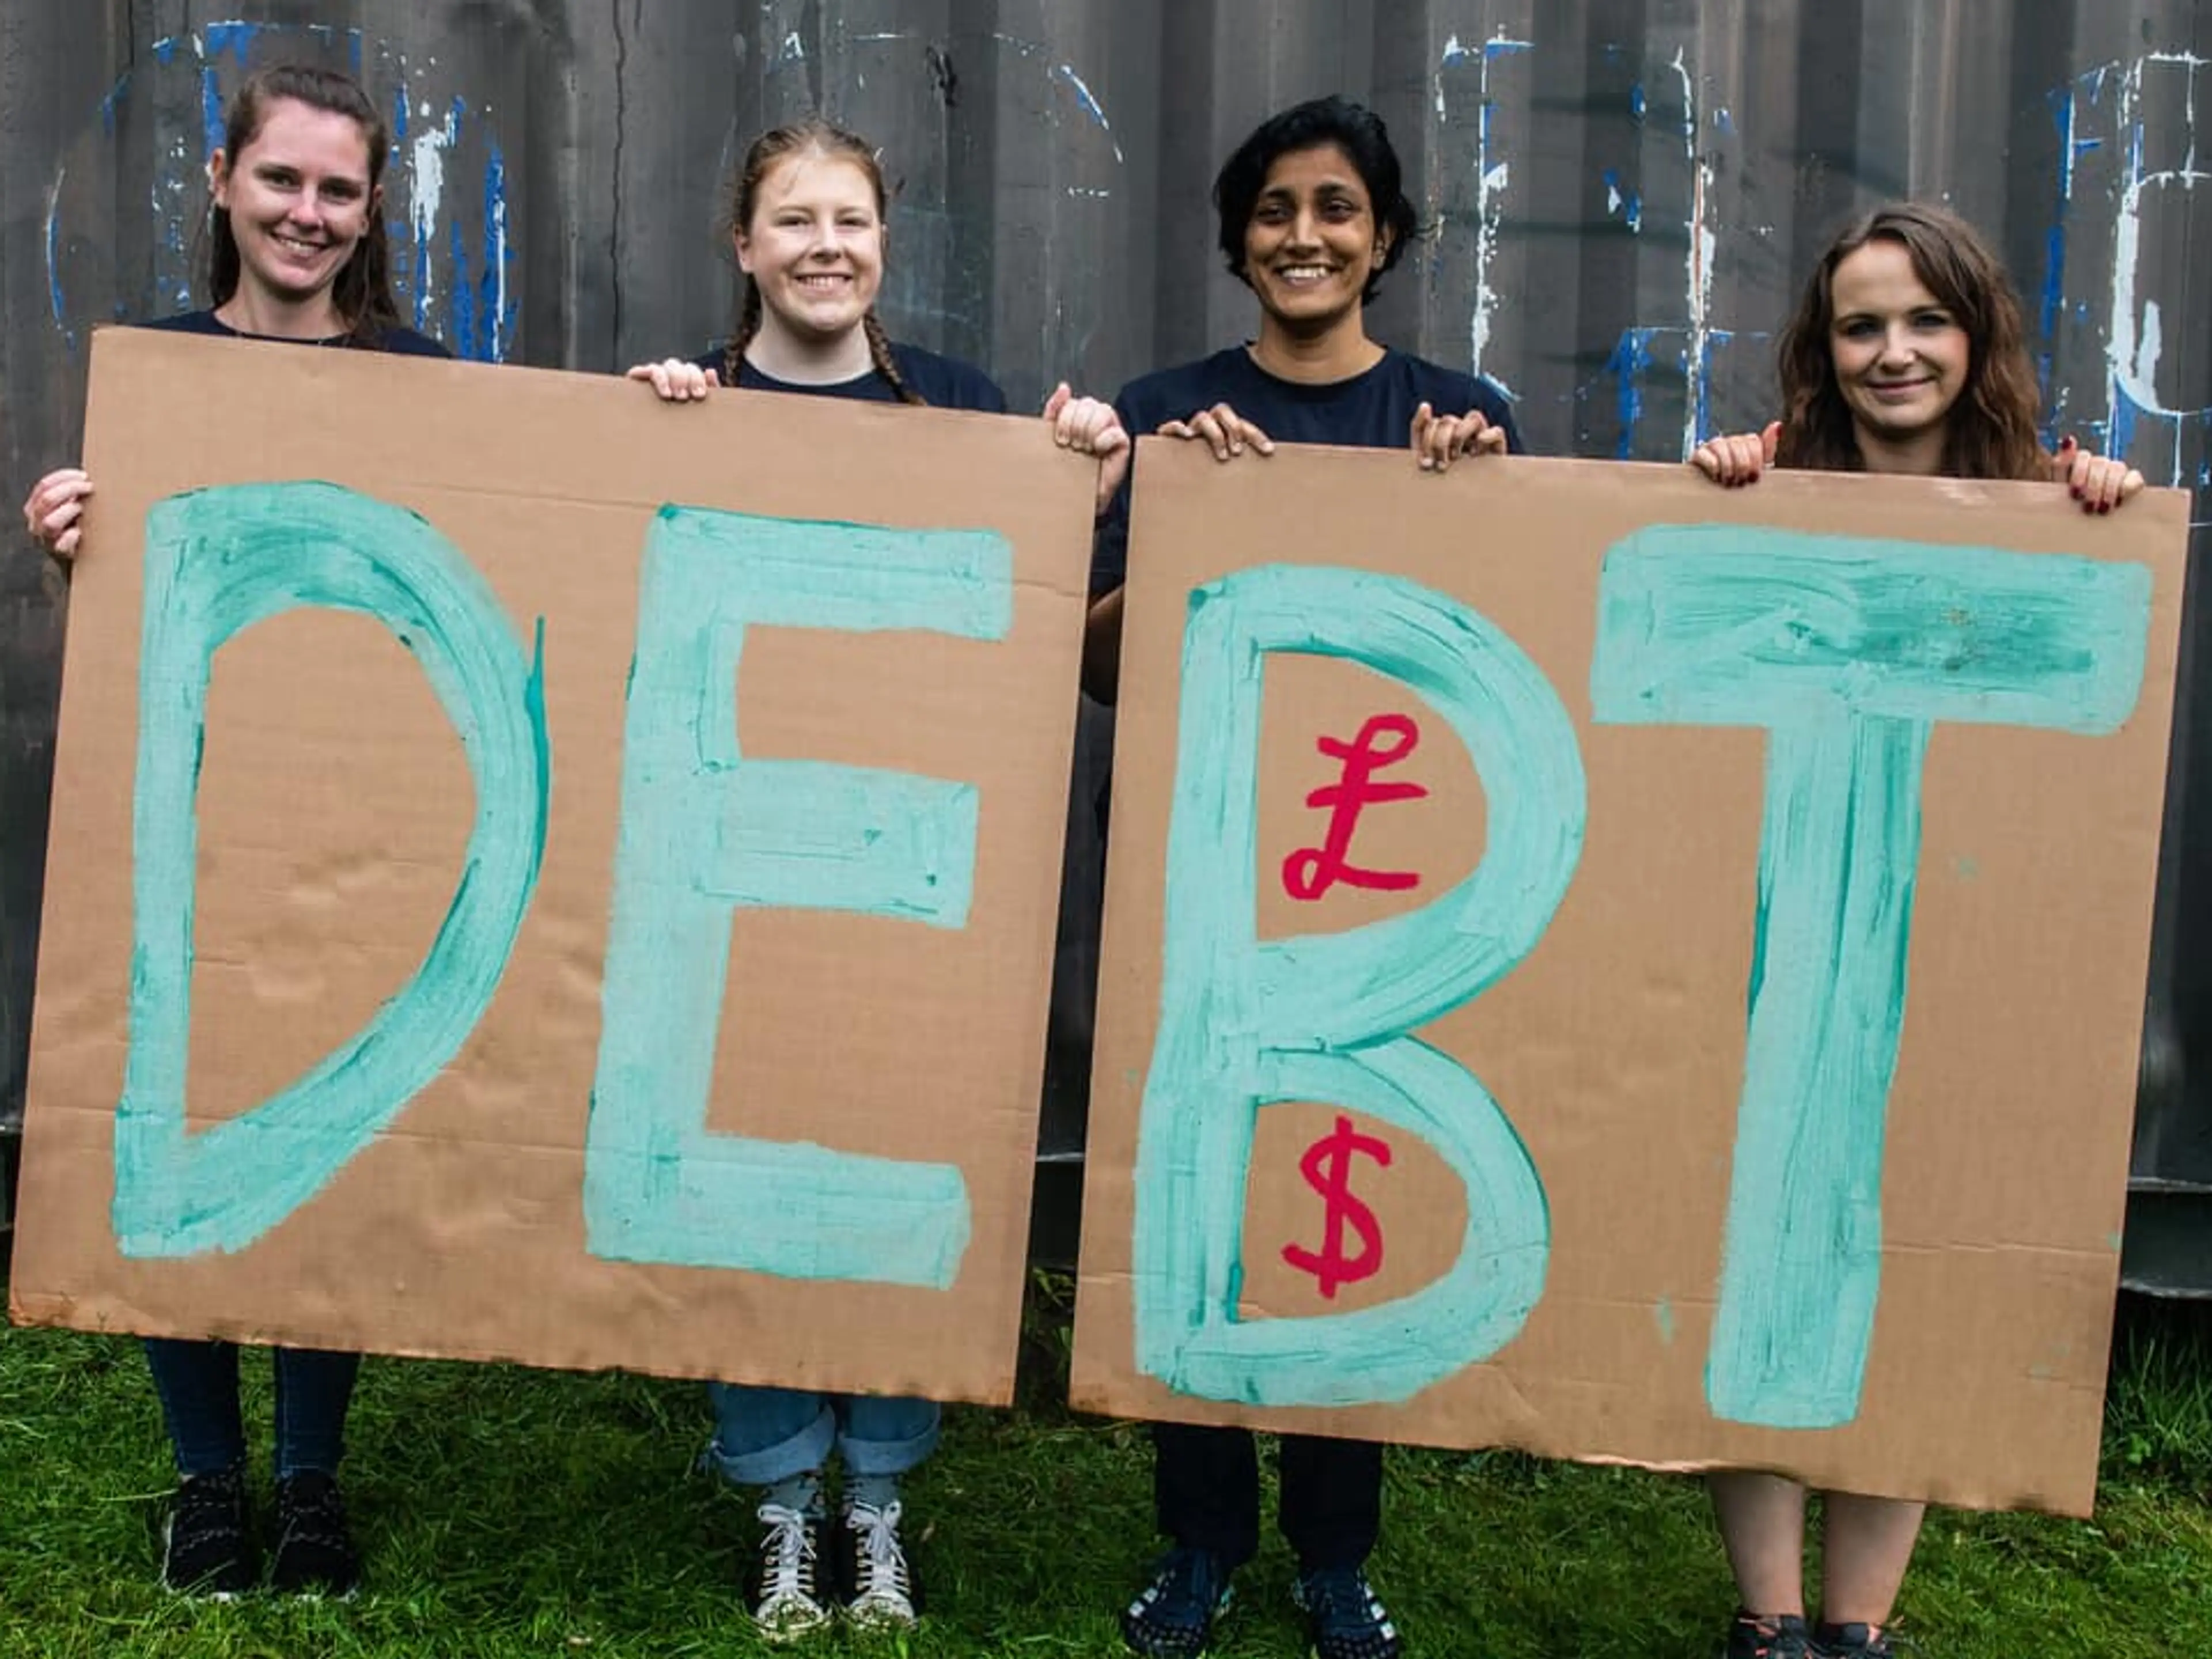 UK - Plymouth - CAFOD supporters holding Debt sign at G7 2021